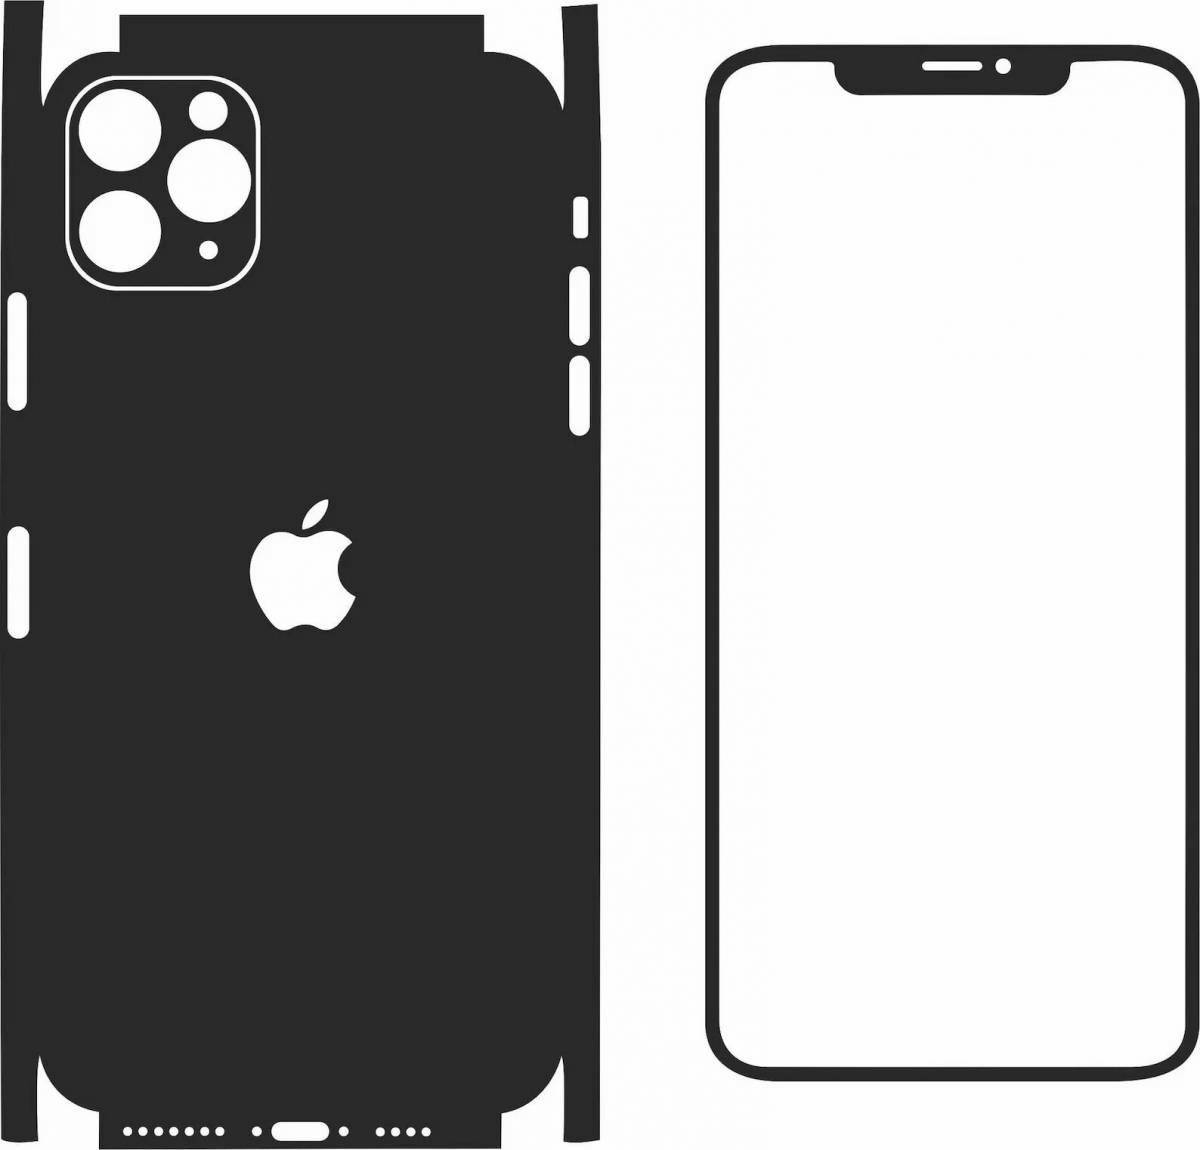 Iphone 11 fat coloring page